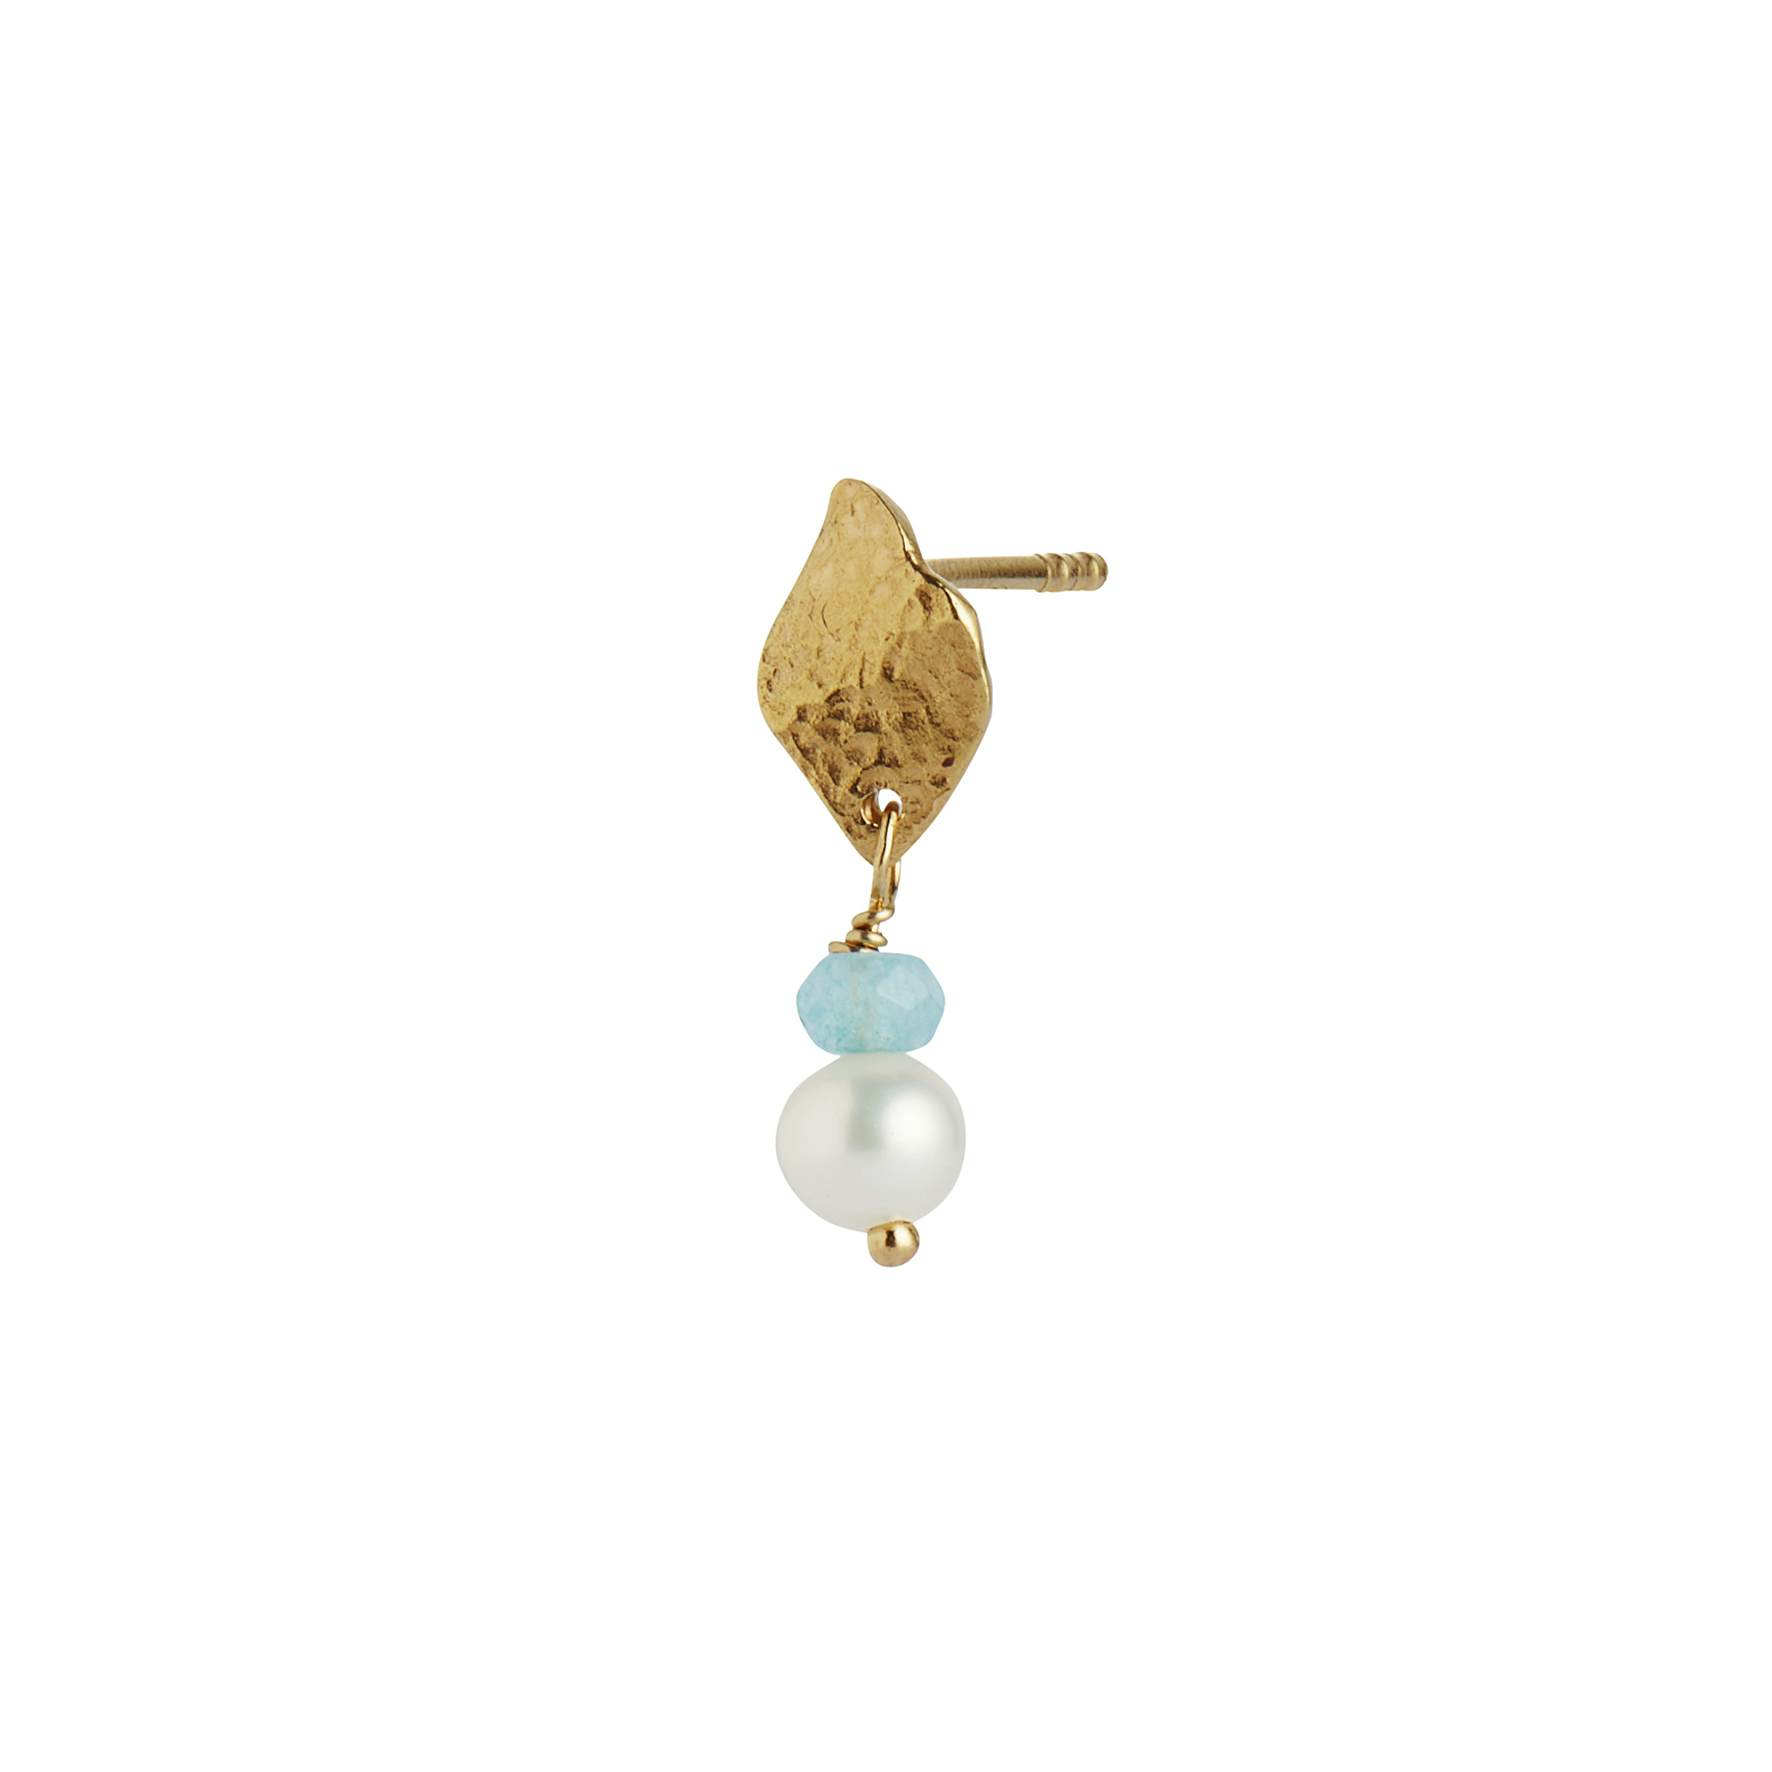 Ile De L'Amour with Pearl and Light Blue Topaz Earring from STINE A Jewelry in Goldplated-Silver Sterling 925